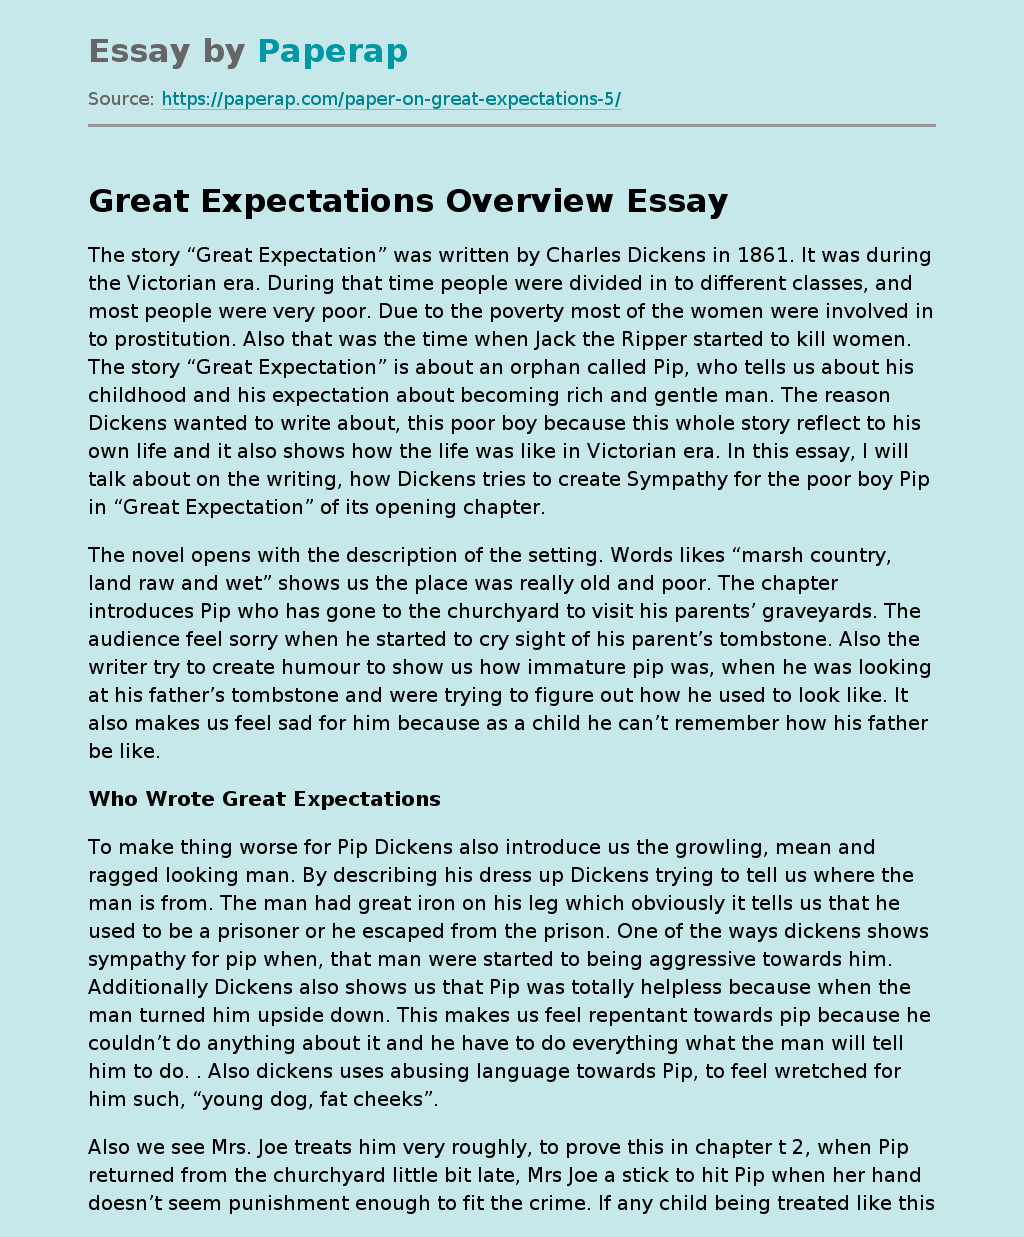 Great Expectations Overview